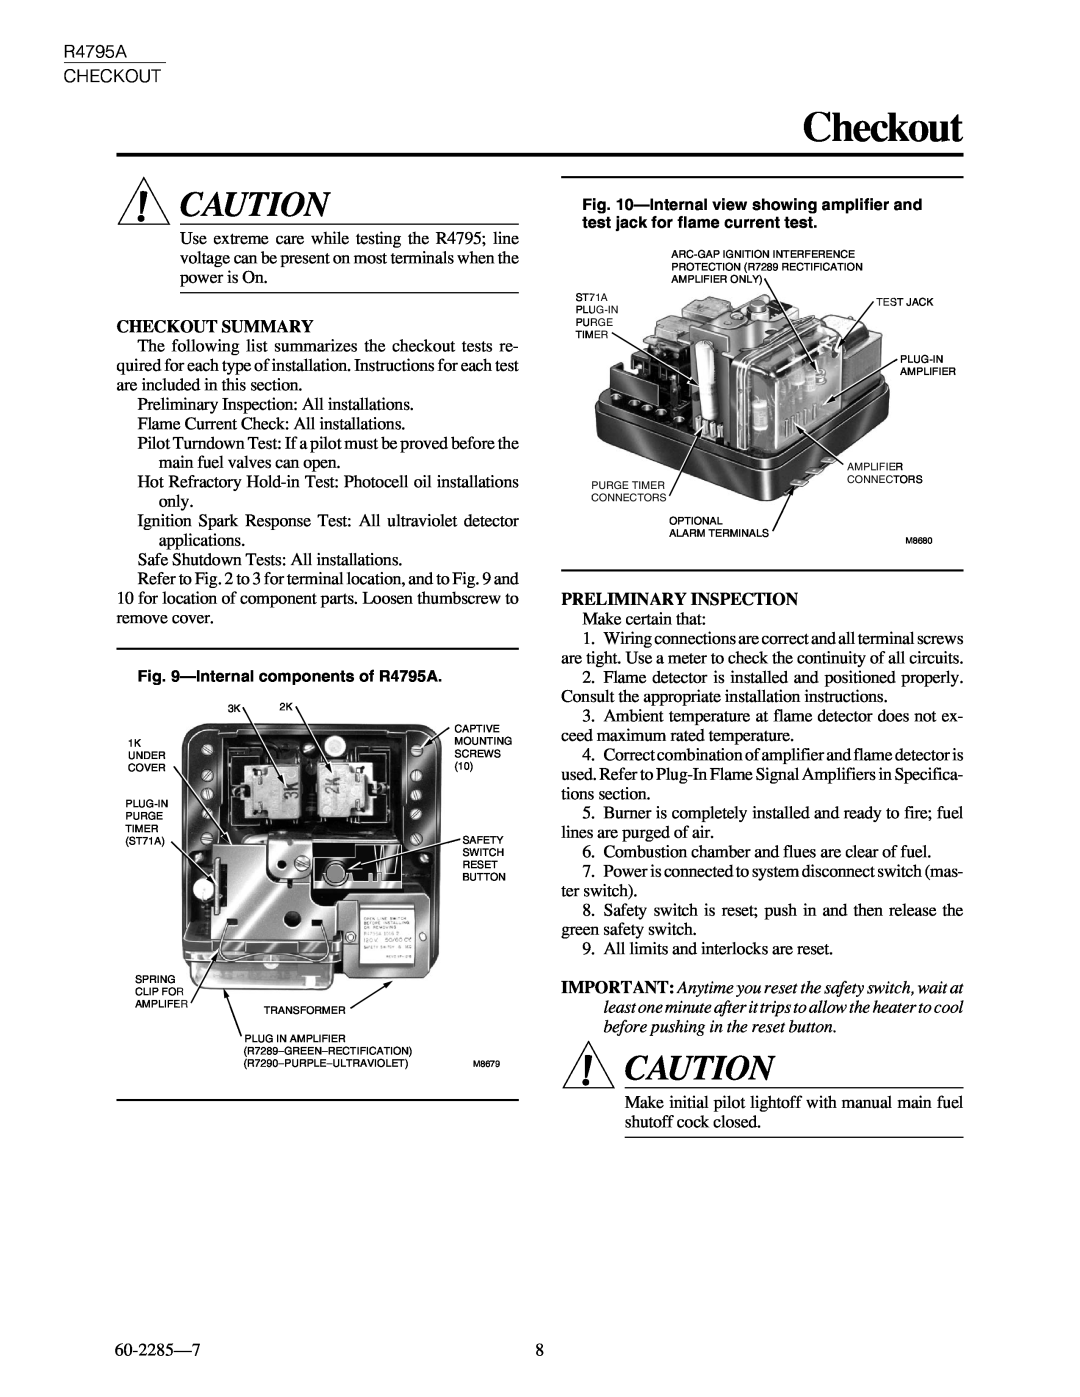 Honeywell R4795A specifications Checkout Summary, Preliminary Inspection 